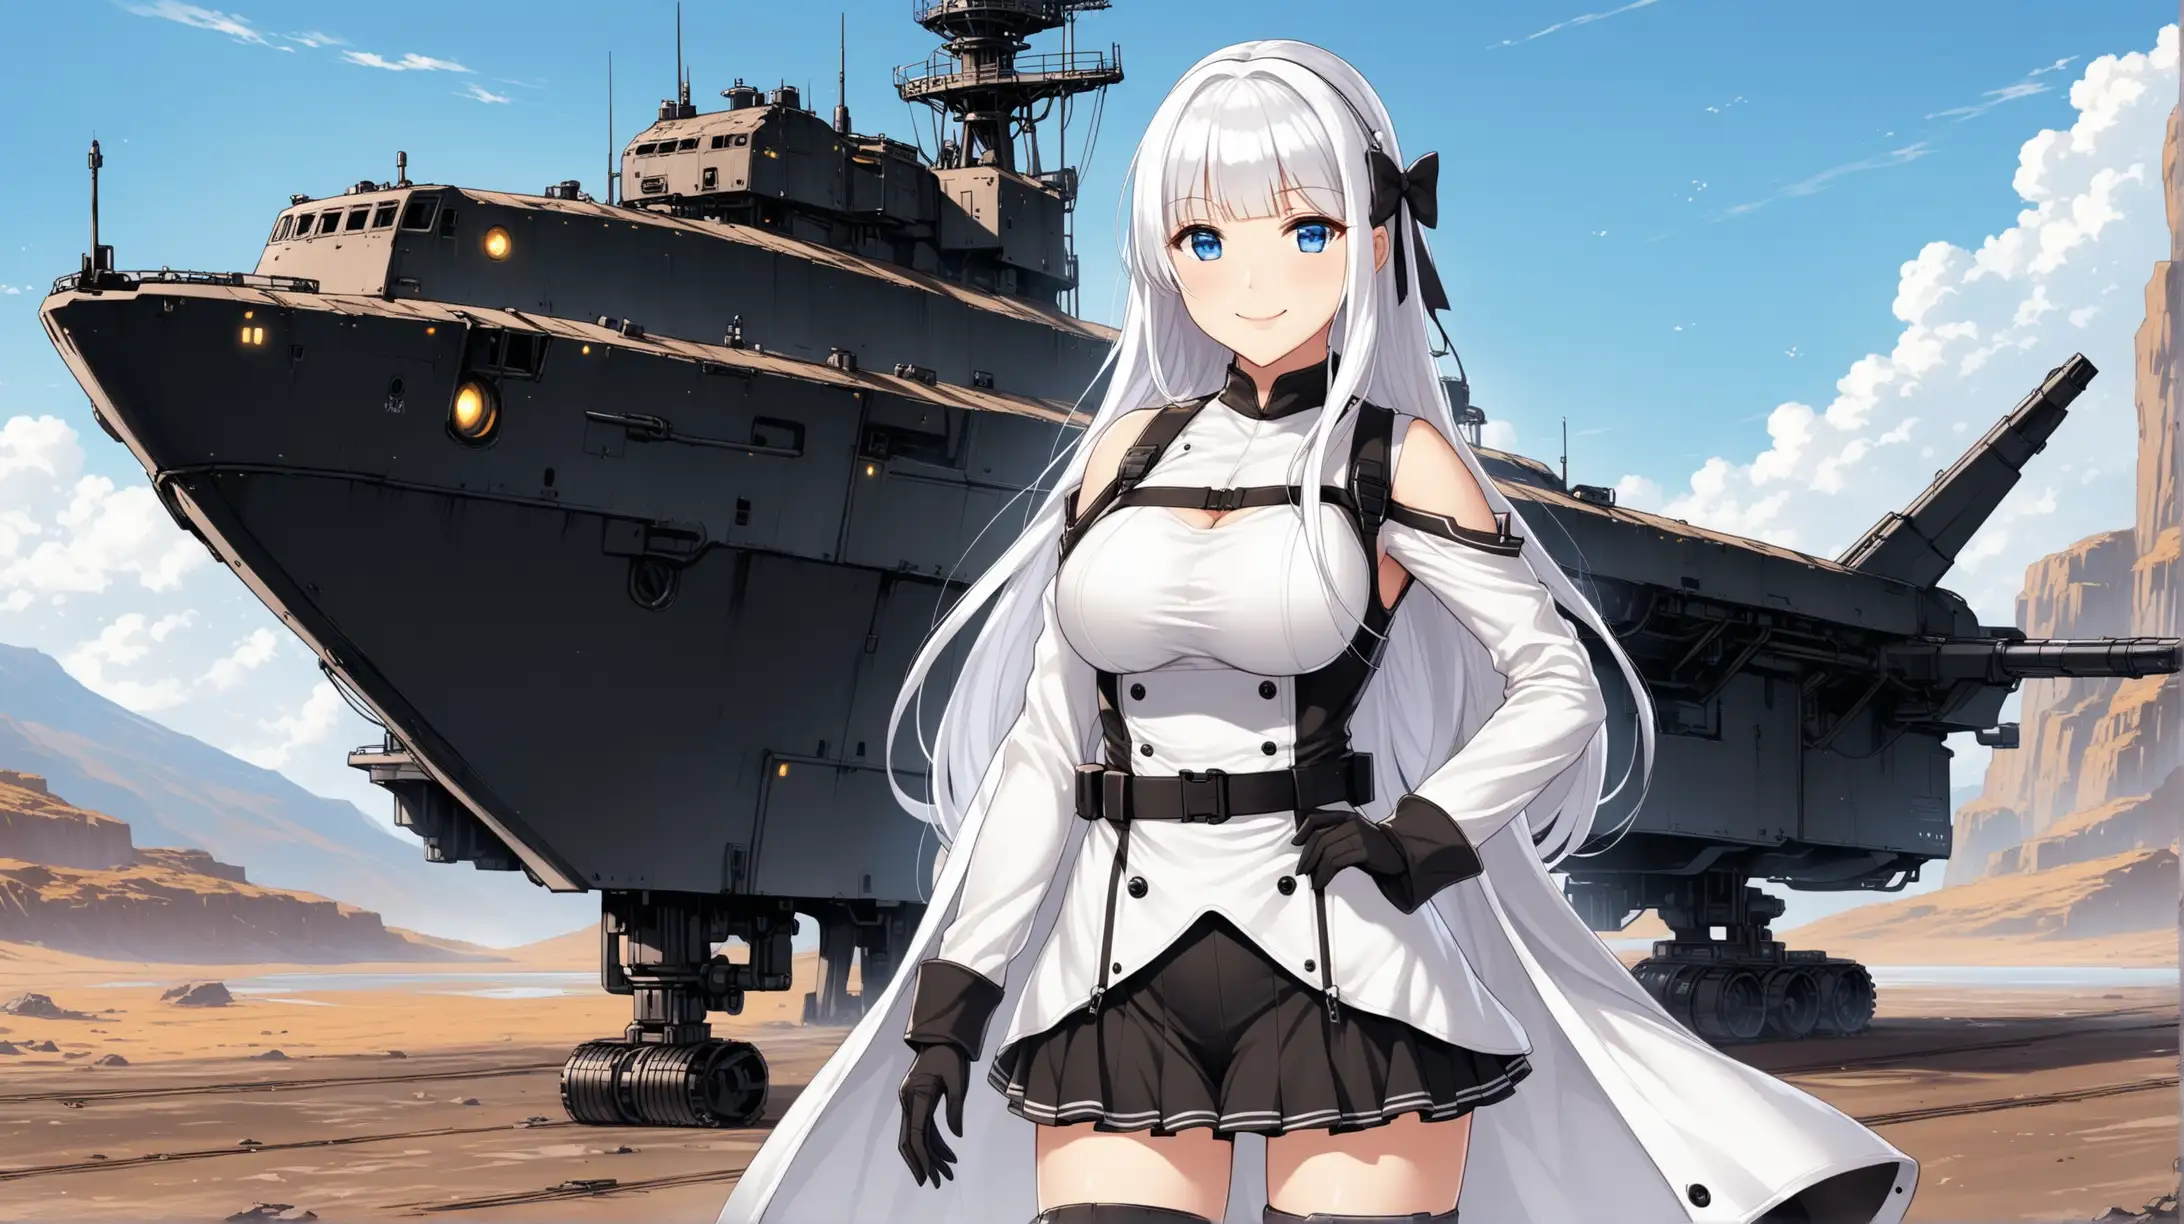 Illustrious from Azur Lane Poses Confidently Outdoors in FalloutInspired Attire